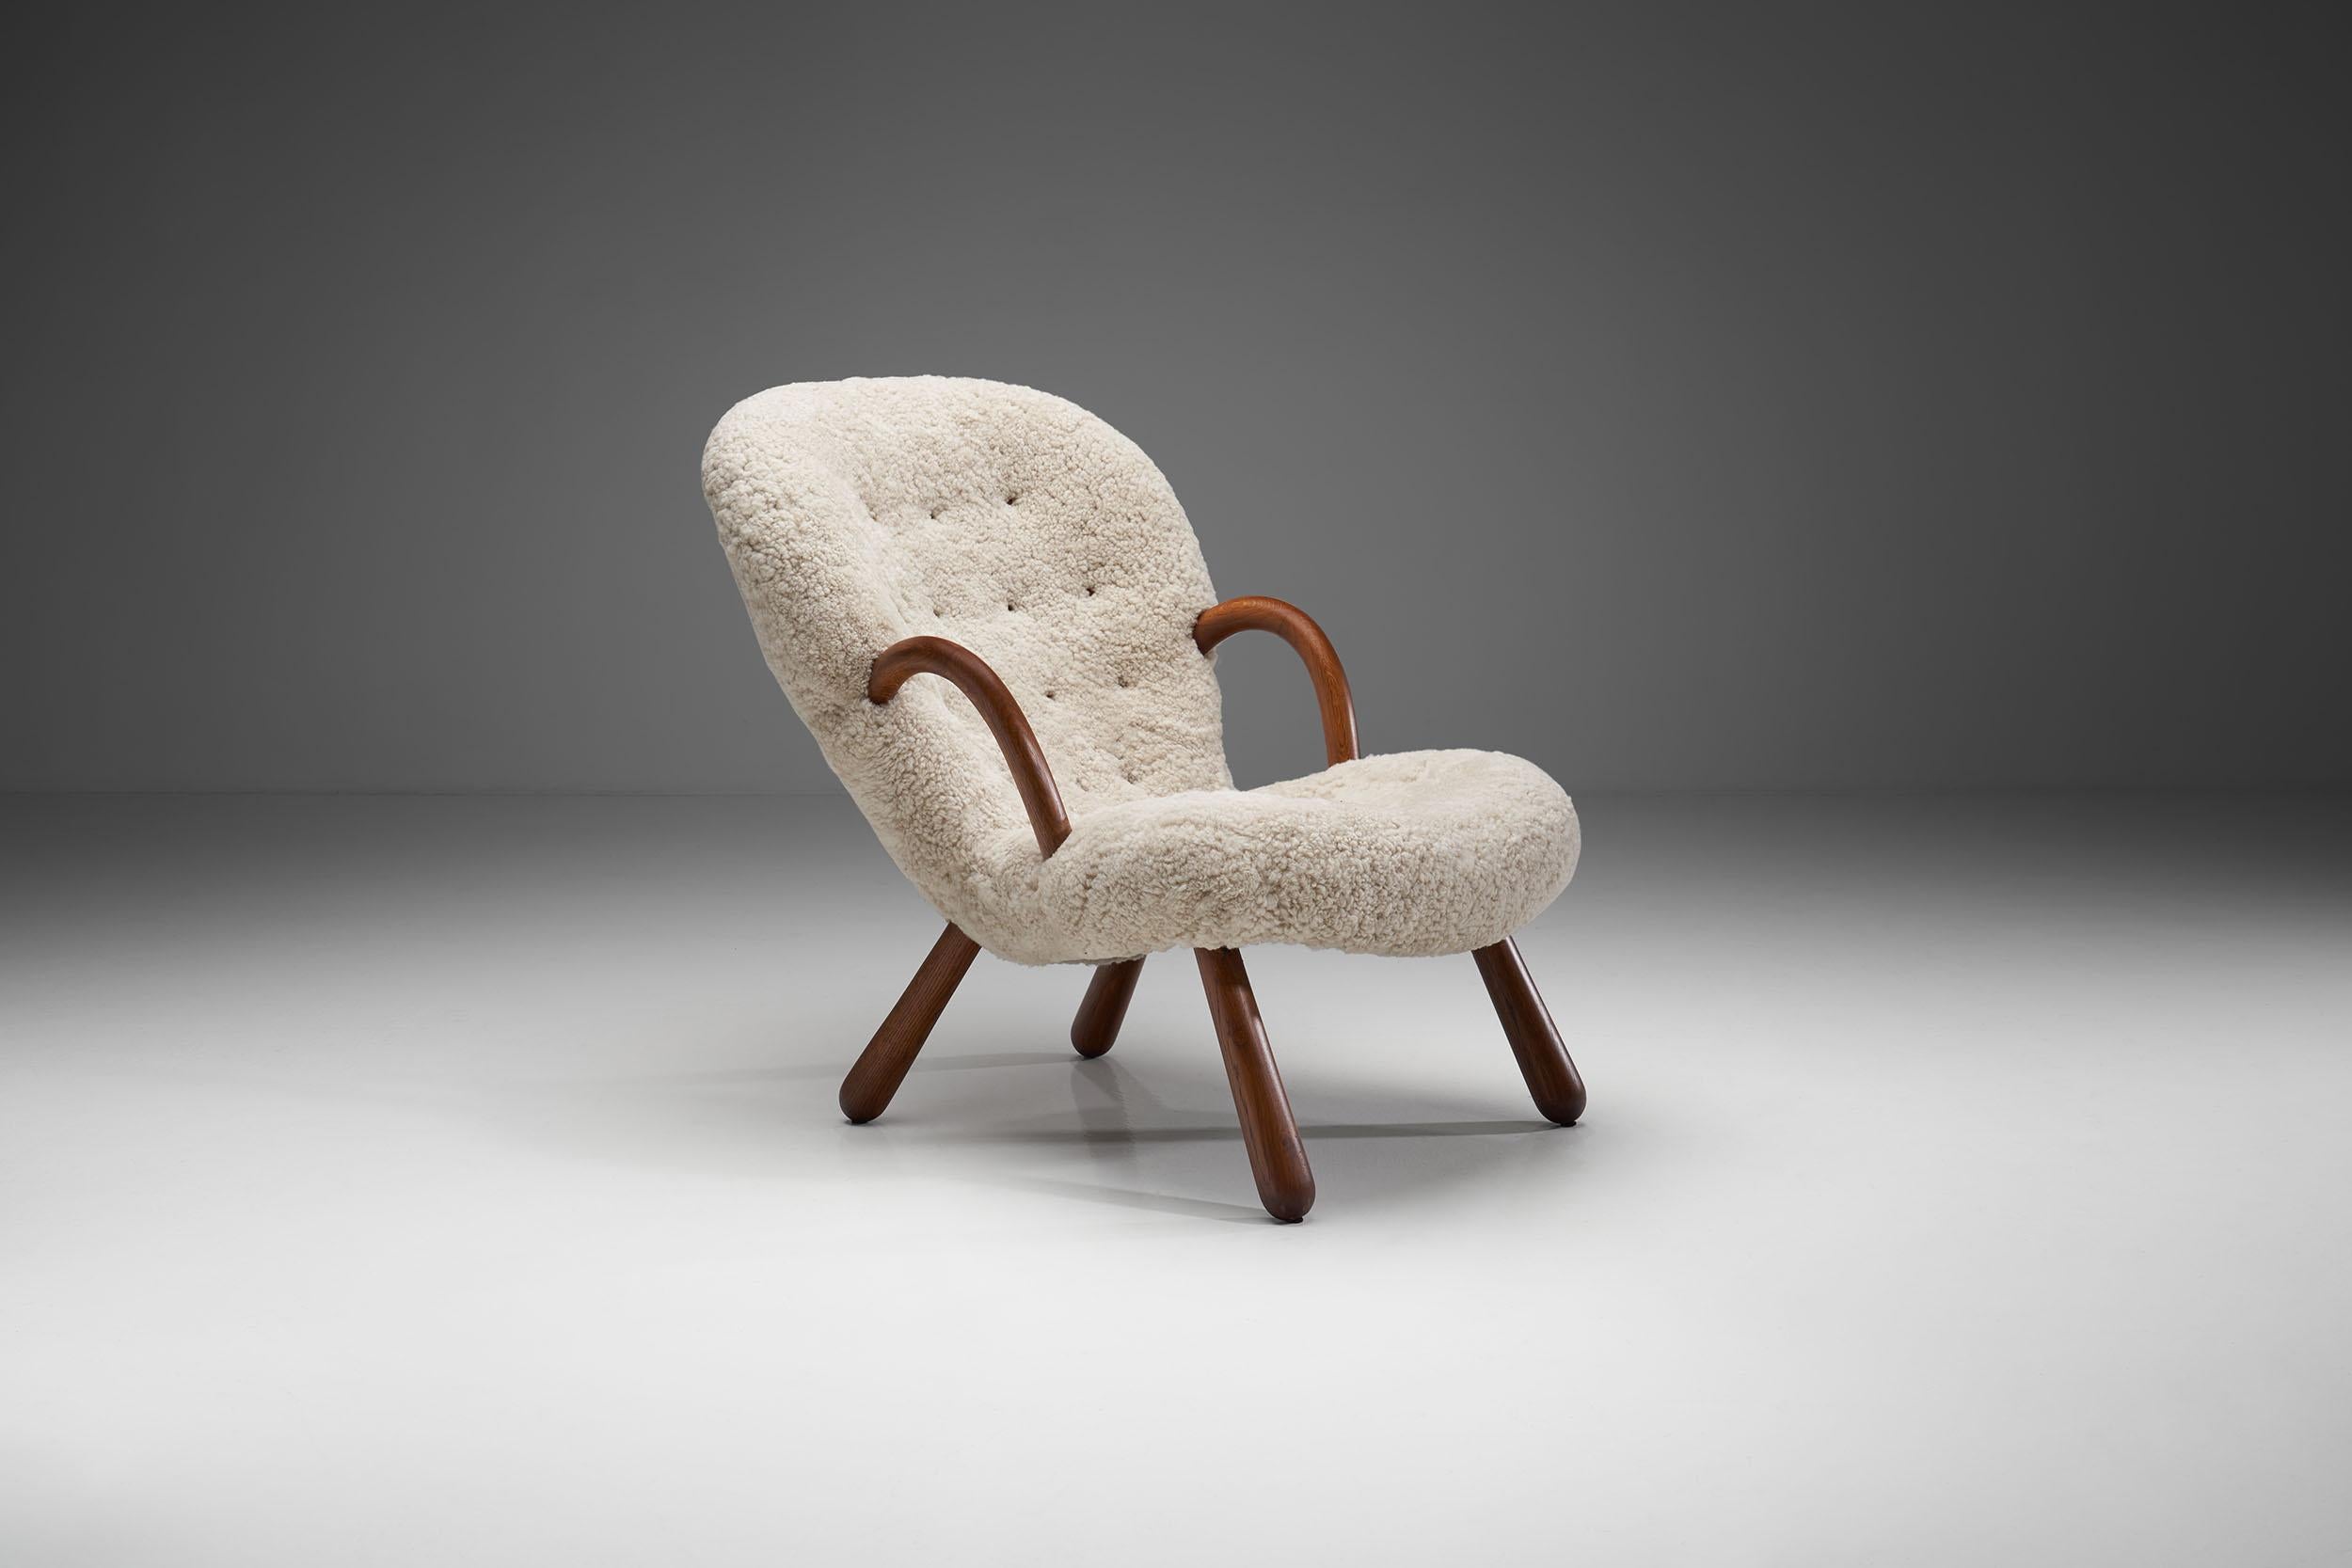 This “Clam” chair has a beloved design thanks to which it is considered by some as one of the most attractive chairs of “Nordic Design”. 

The model has a rather perplexing history, and has been attributed to several designers before, the latest